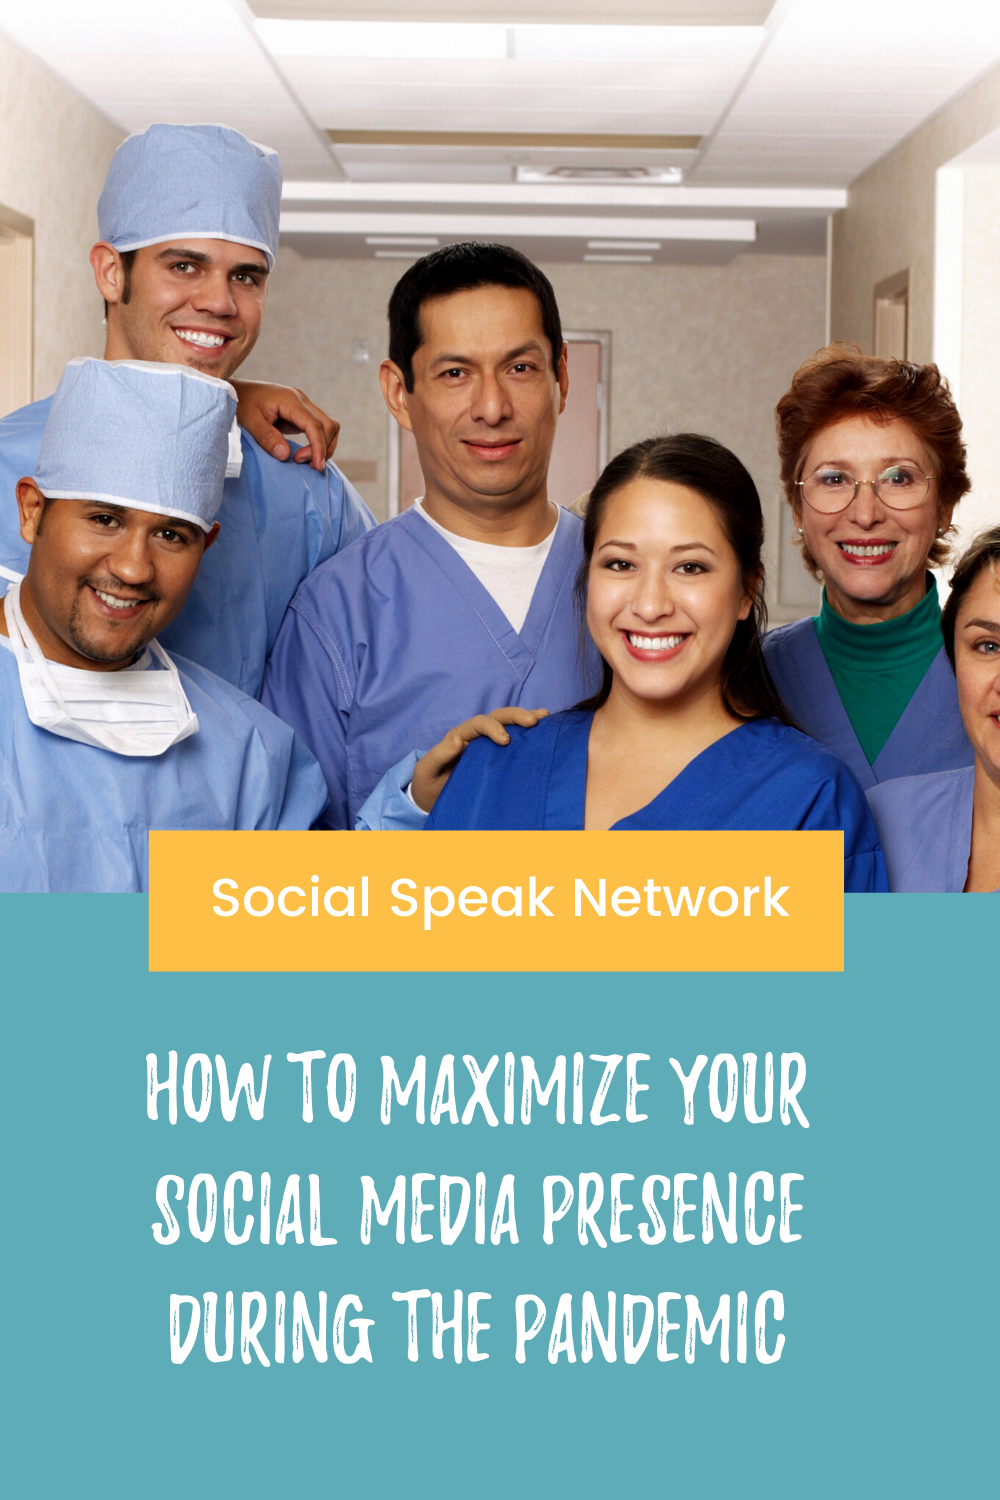 How to Maximize Your Social Media Presence During the Pandemic